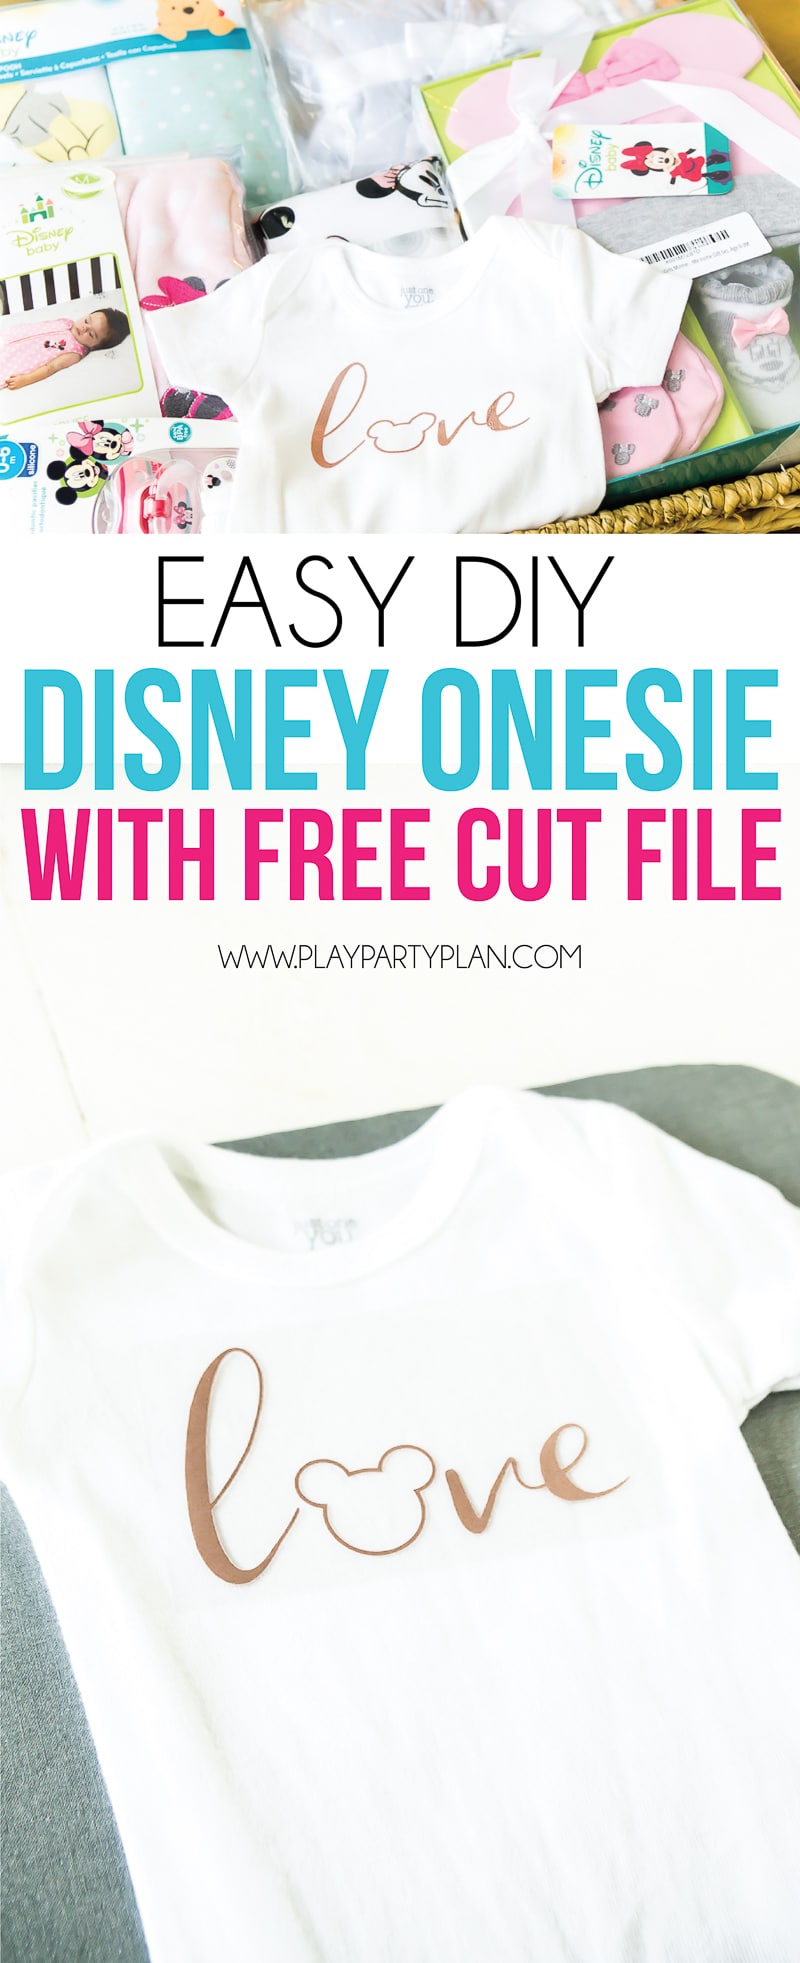 Easy Disney onesie with a free cut file!